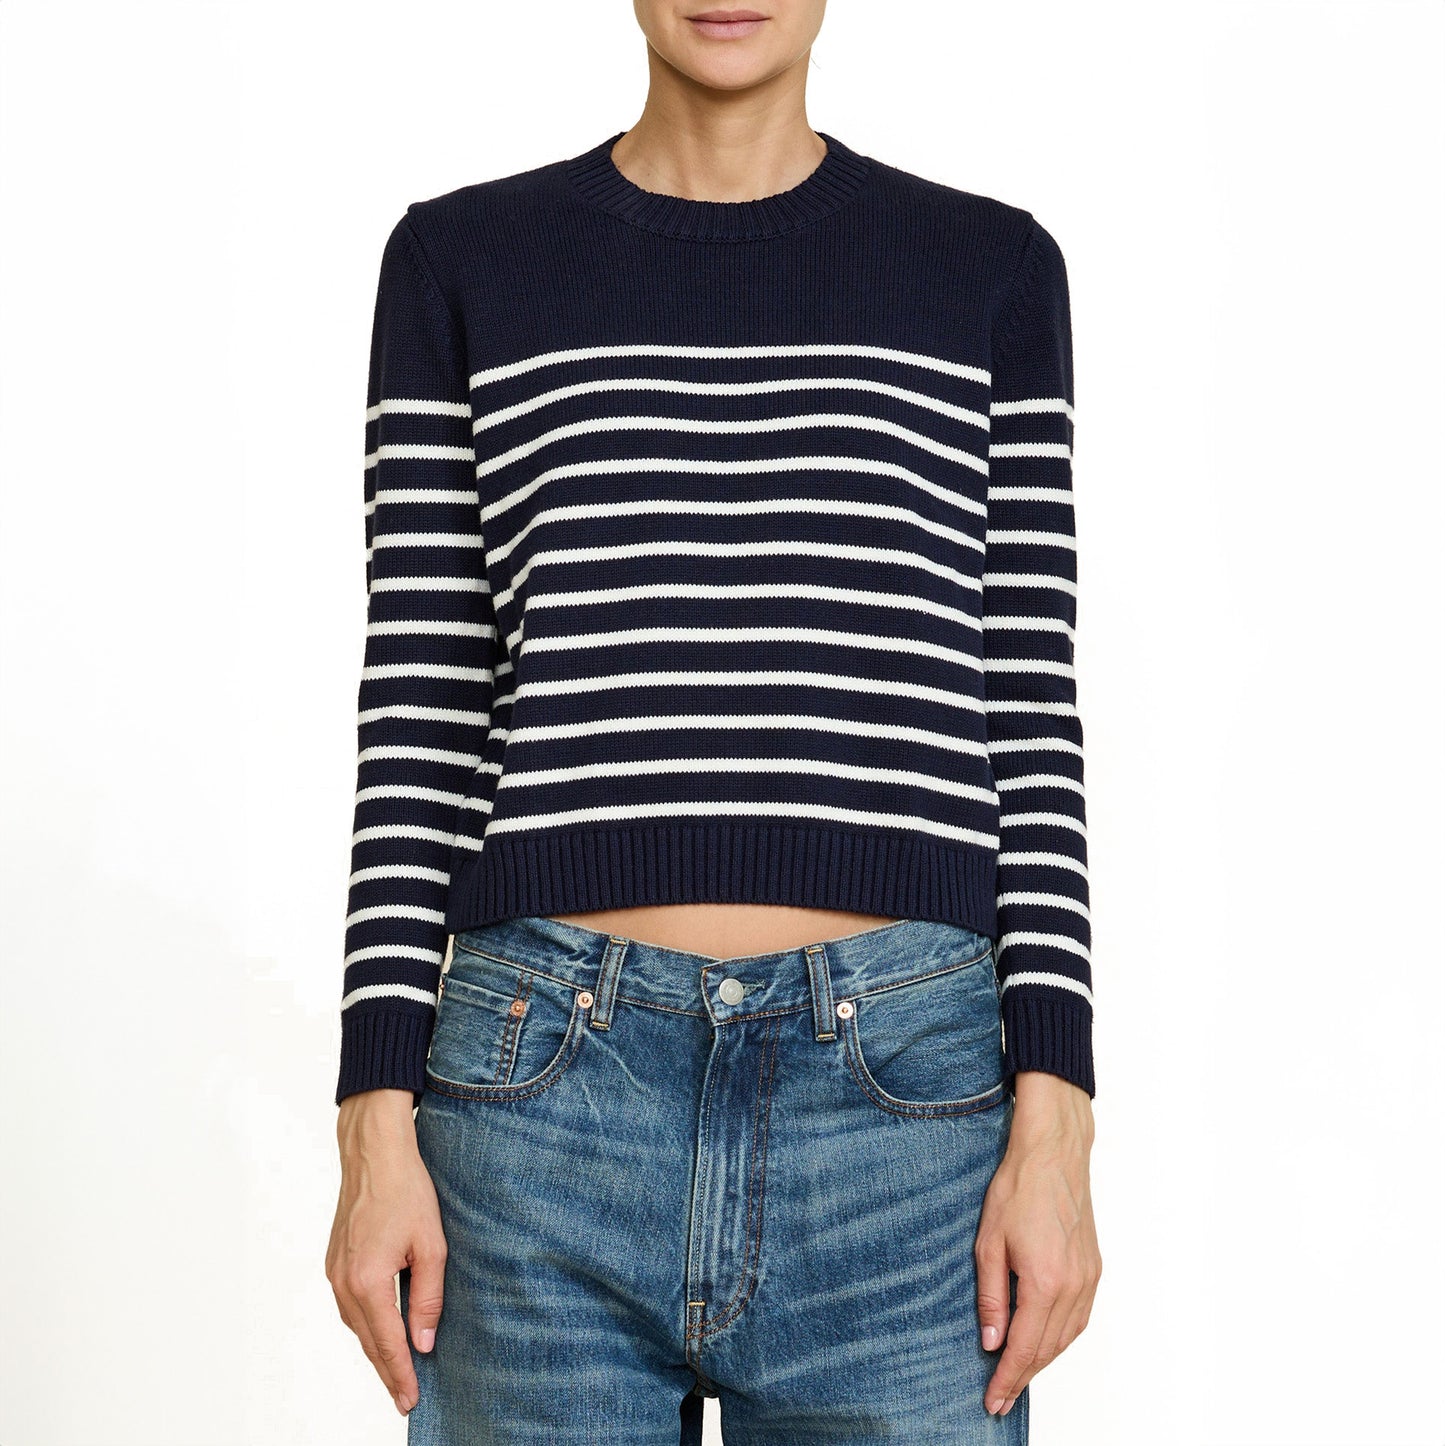 Striped Pullover in Navy & Off White